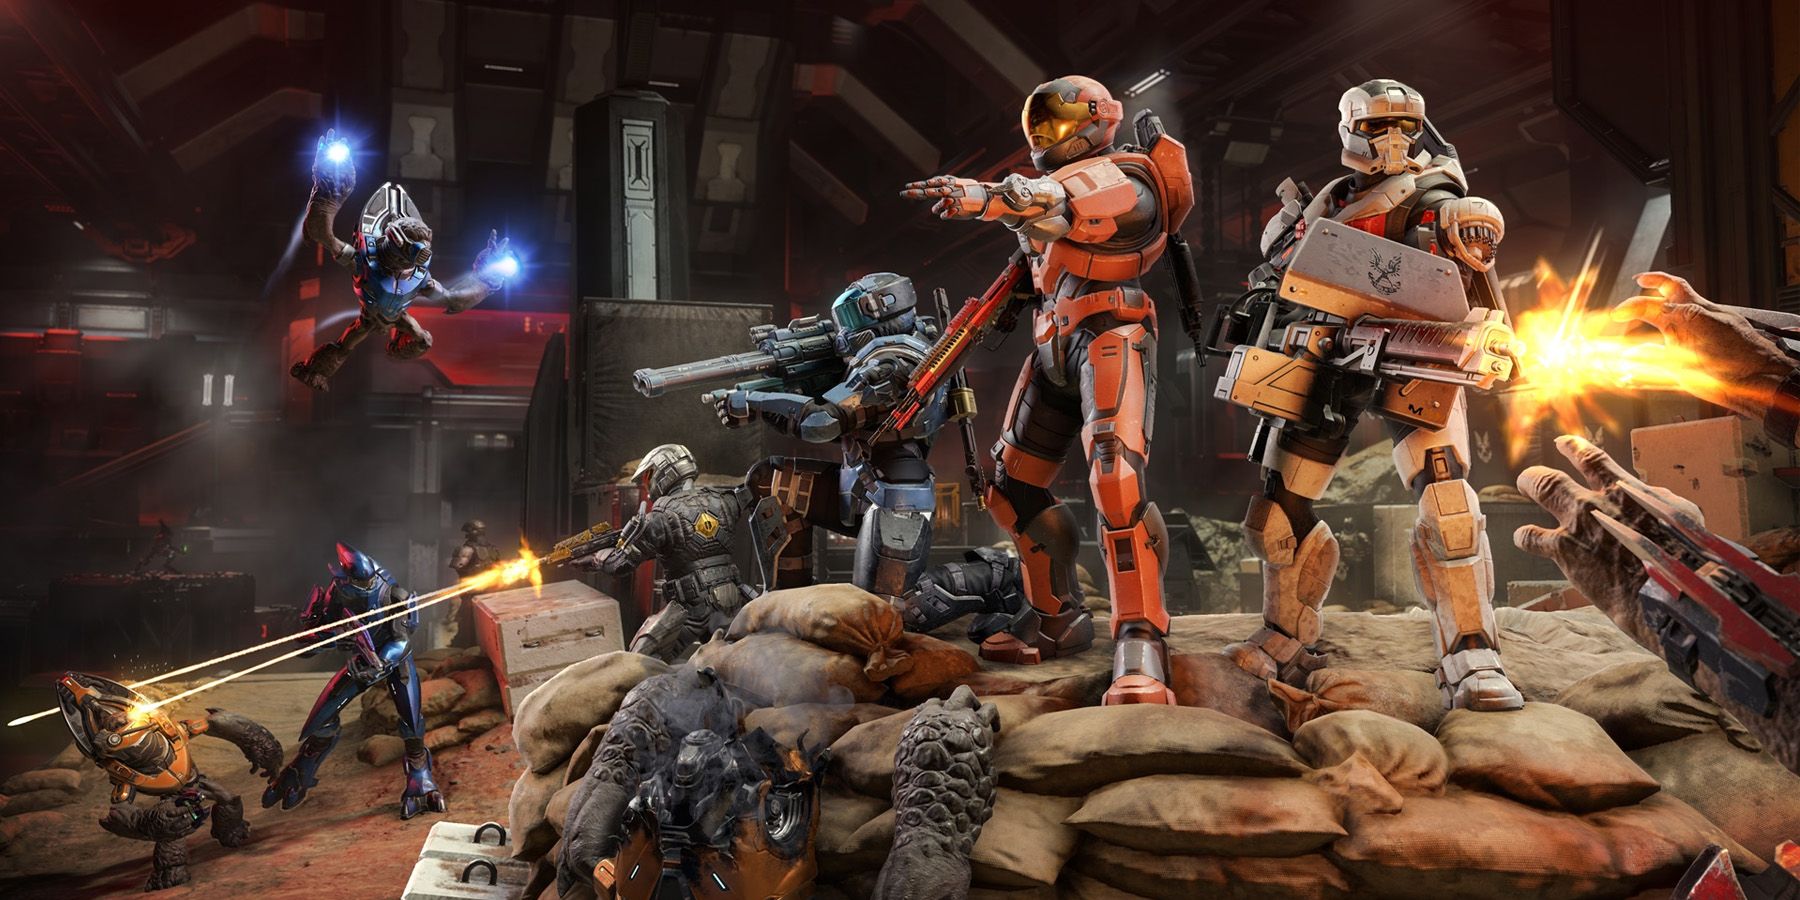 Halo Infinite Firefight King of the Hill banner image showing players facing off against a horde.